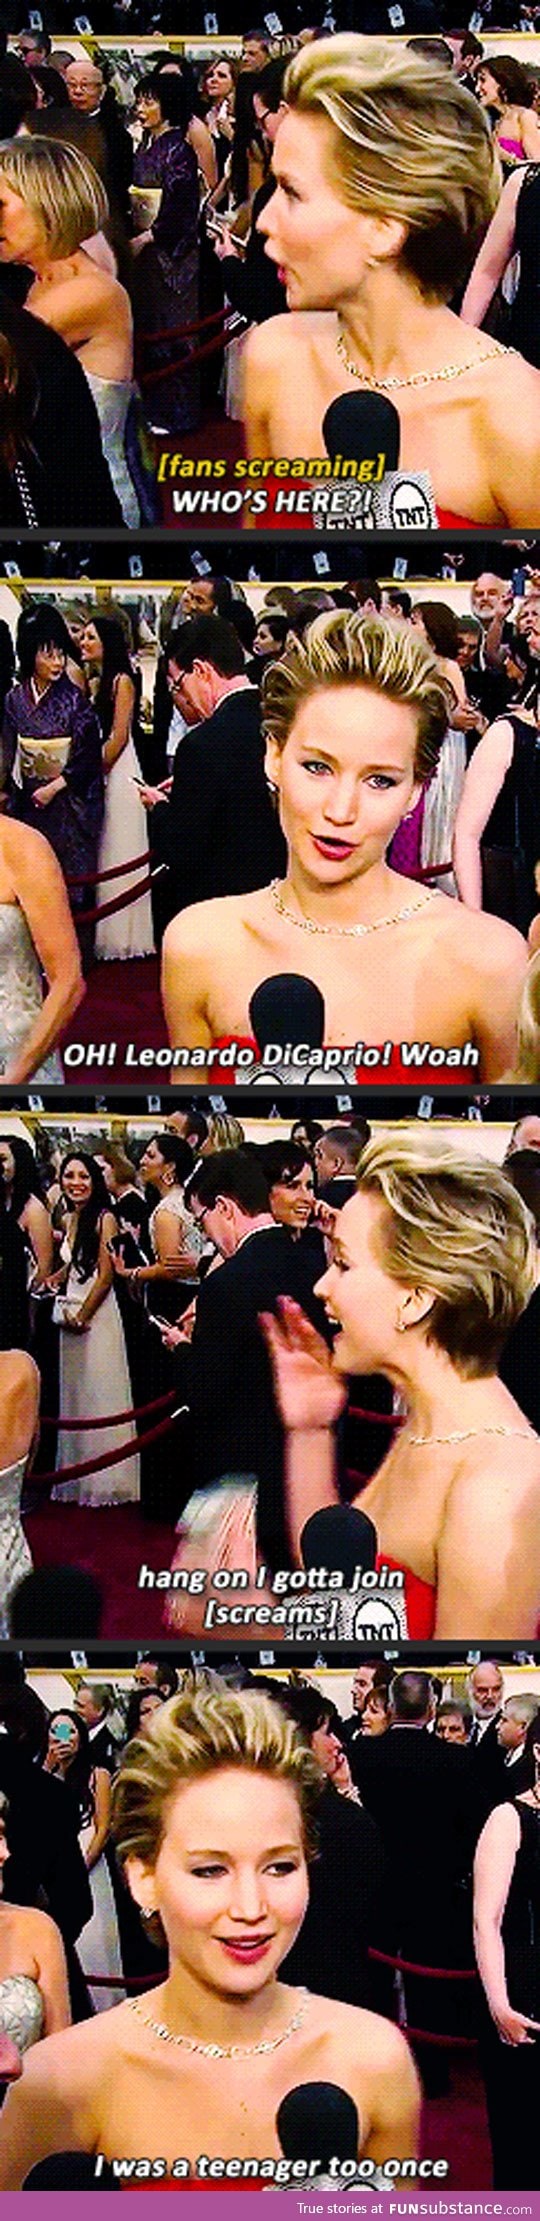 Jennifer Lawrence Was a Teenager Too